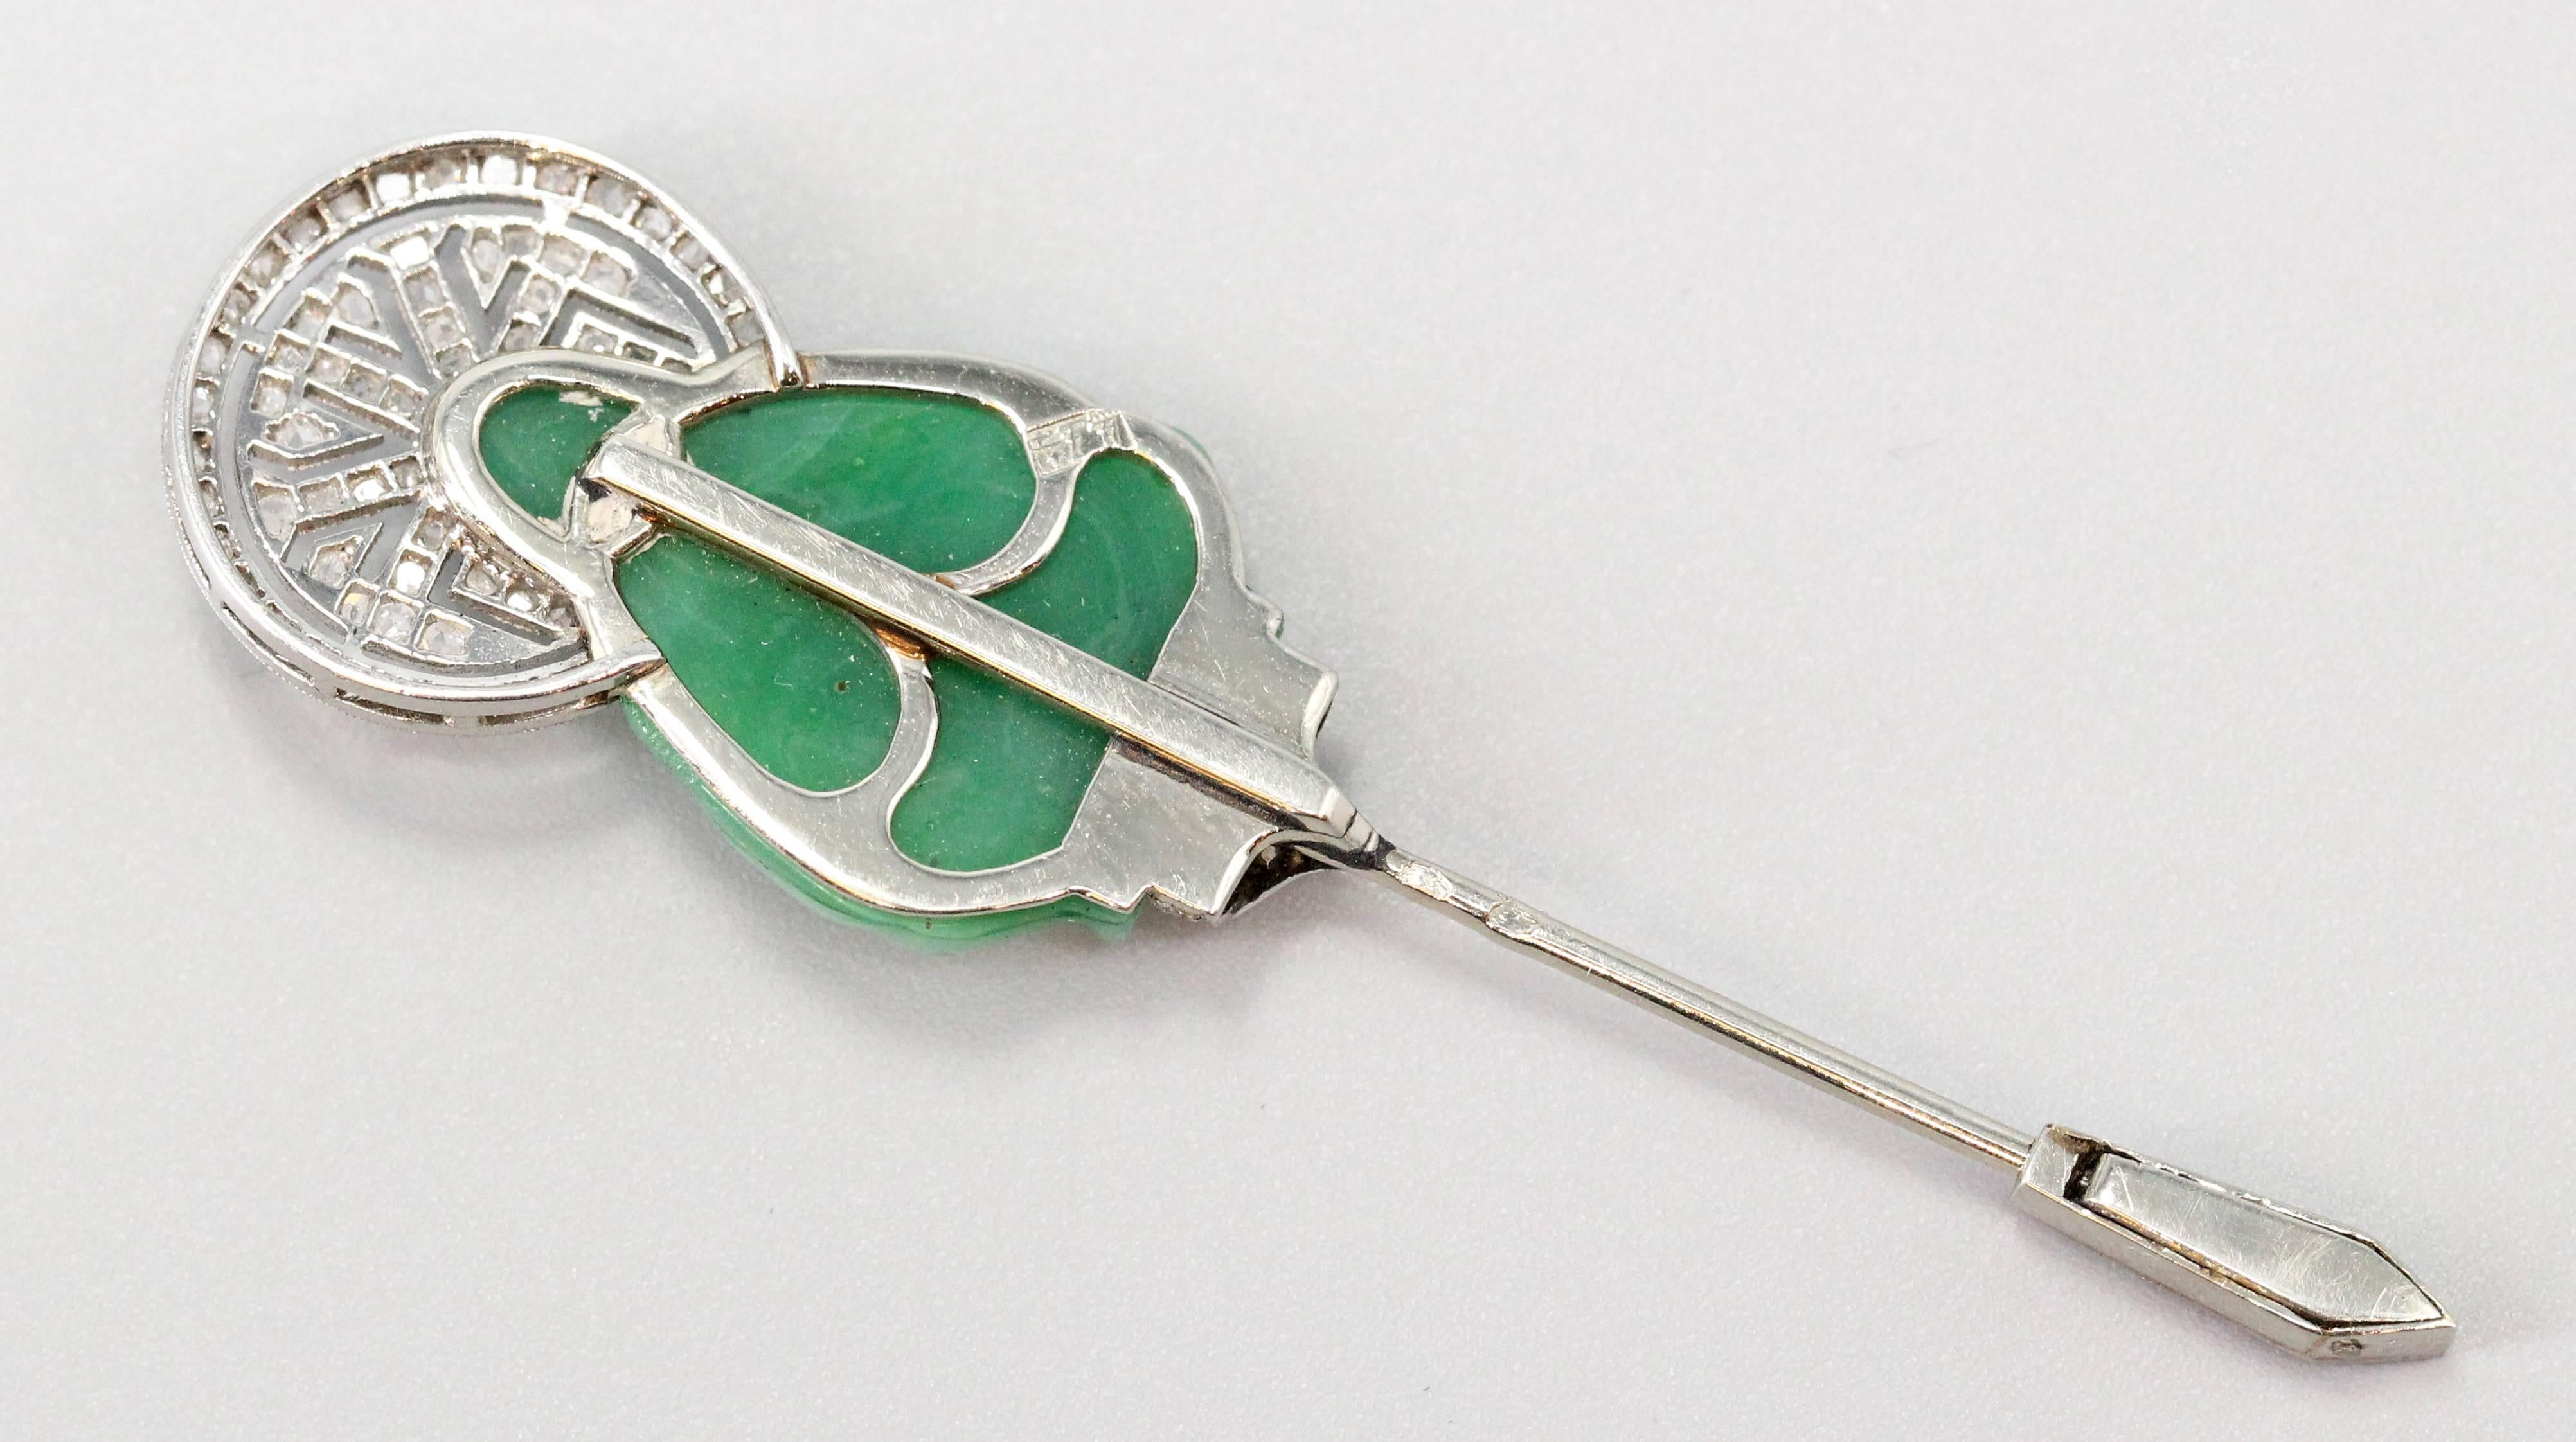 Rare and unusual Art Deco diamond, green stone and platinum jabot pin of French origin, circa 1920s-30s. It features the likeness of a Buddha playing a flute like instrument, made in a carved green stone, with diamonds over a platinum setting.